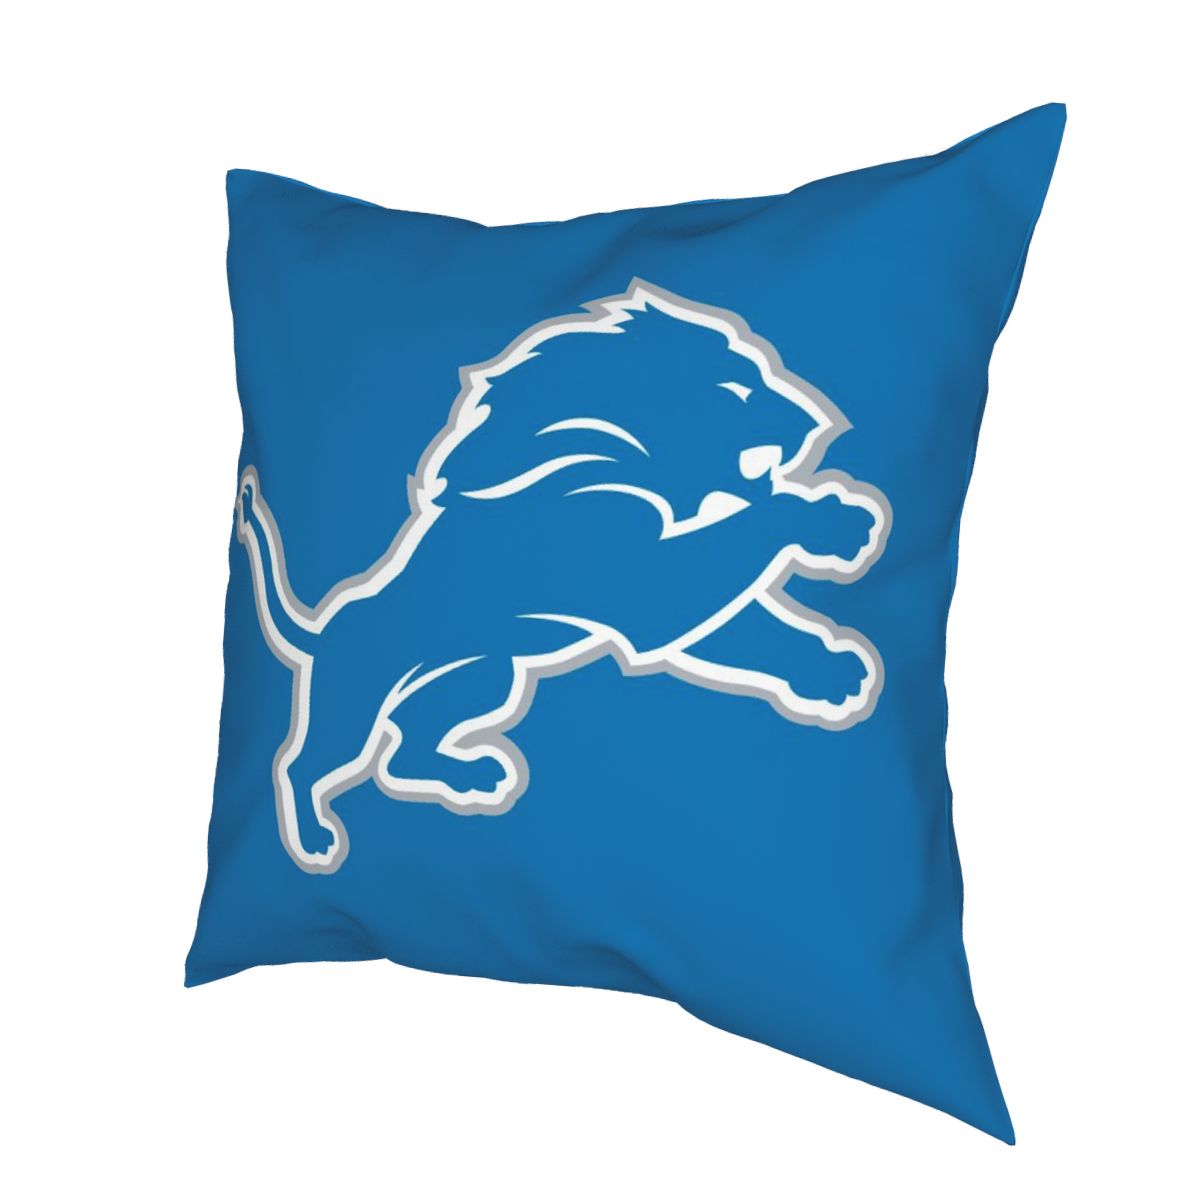 Custom Decorative Football Pillow Case Detroit Lions Blue Pillowcase Personalized Throw Pillow Covers